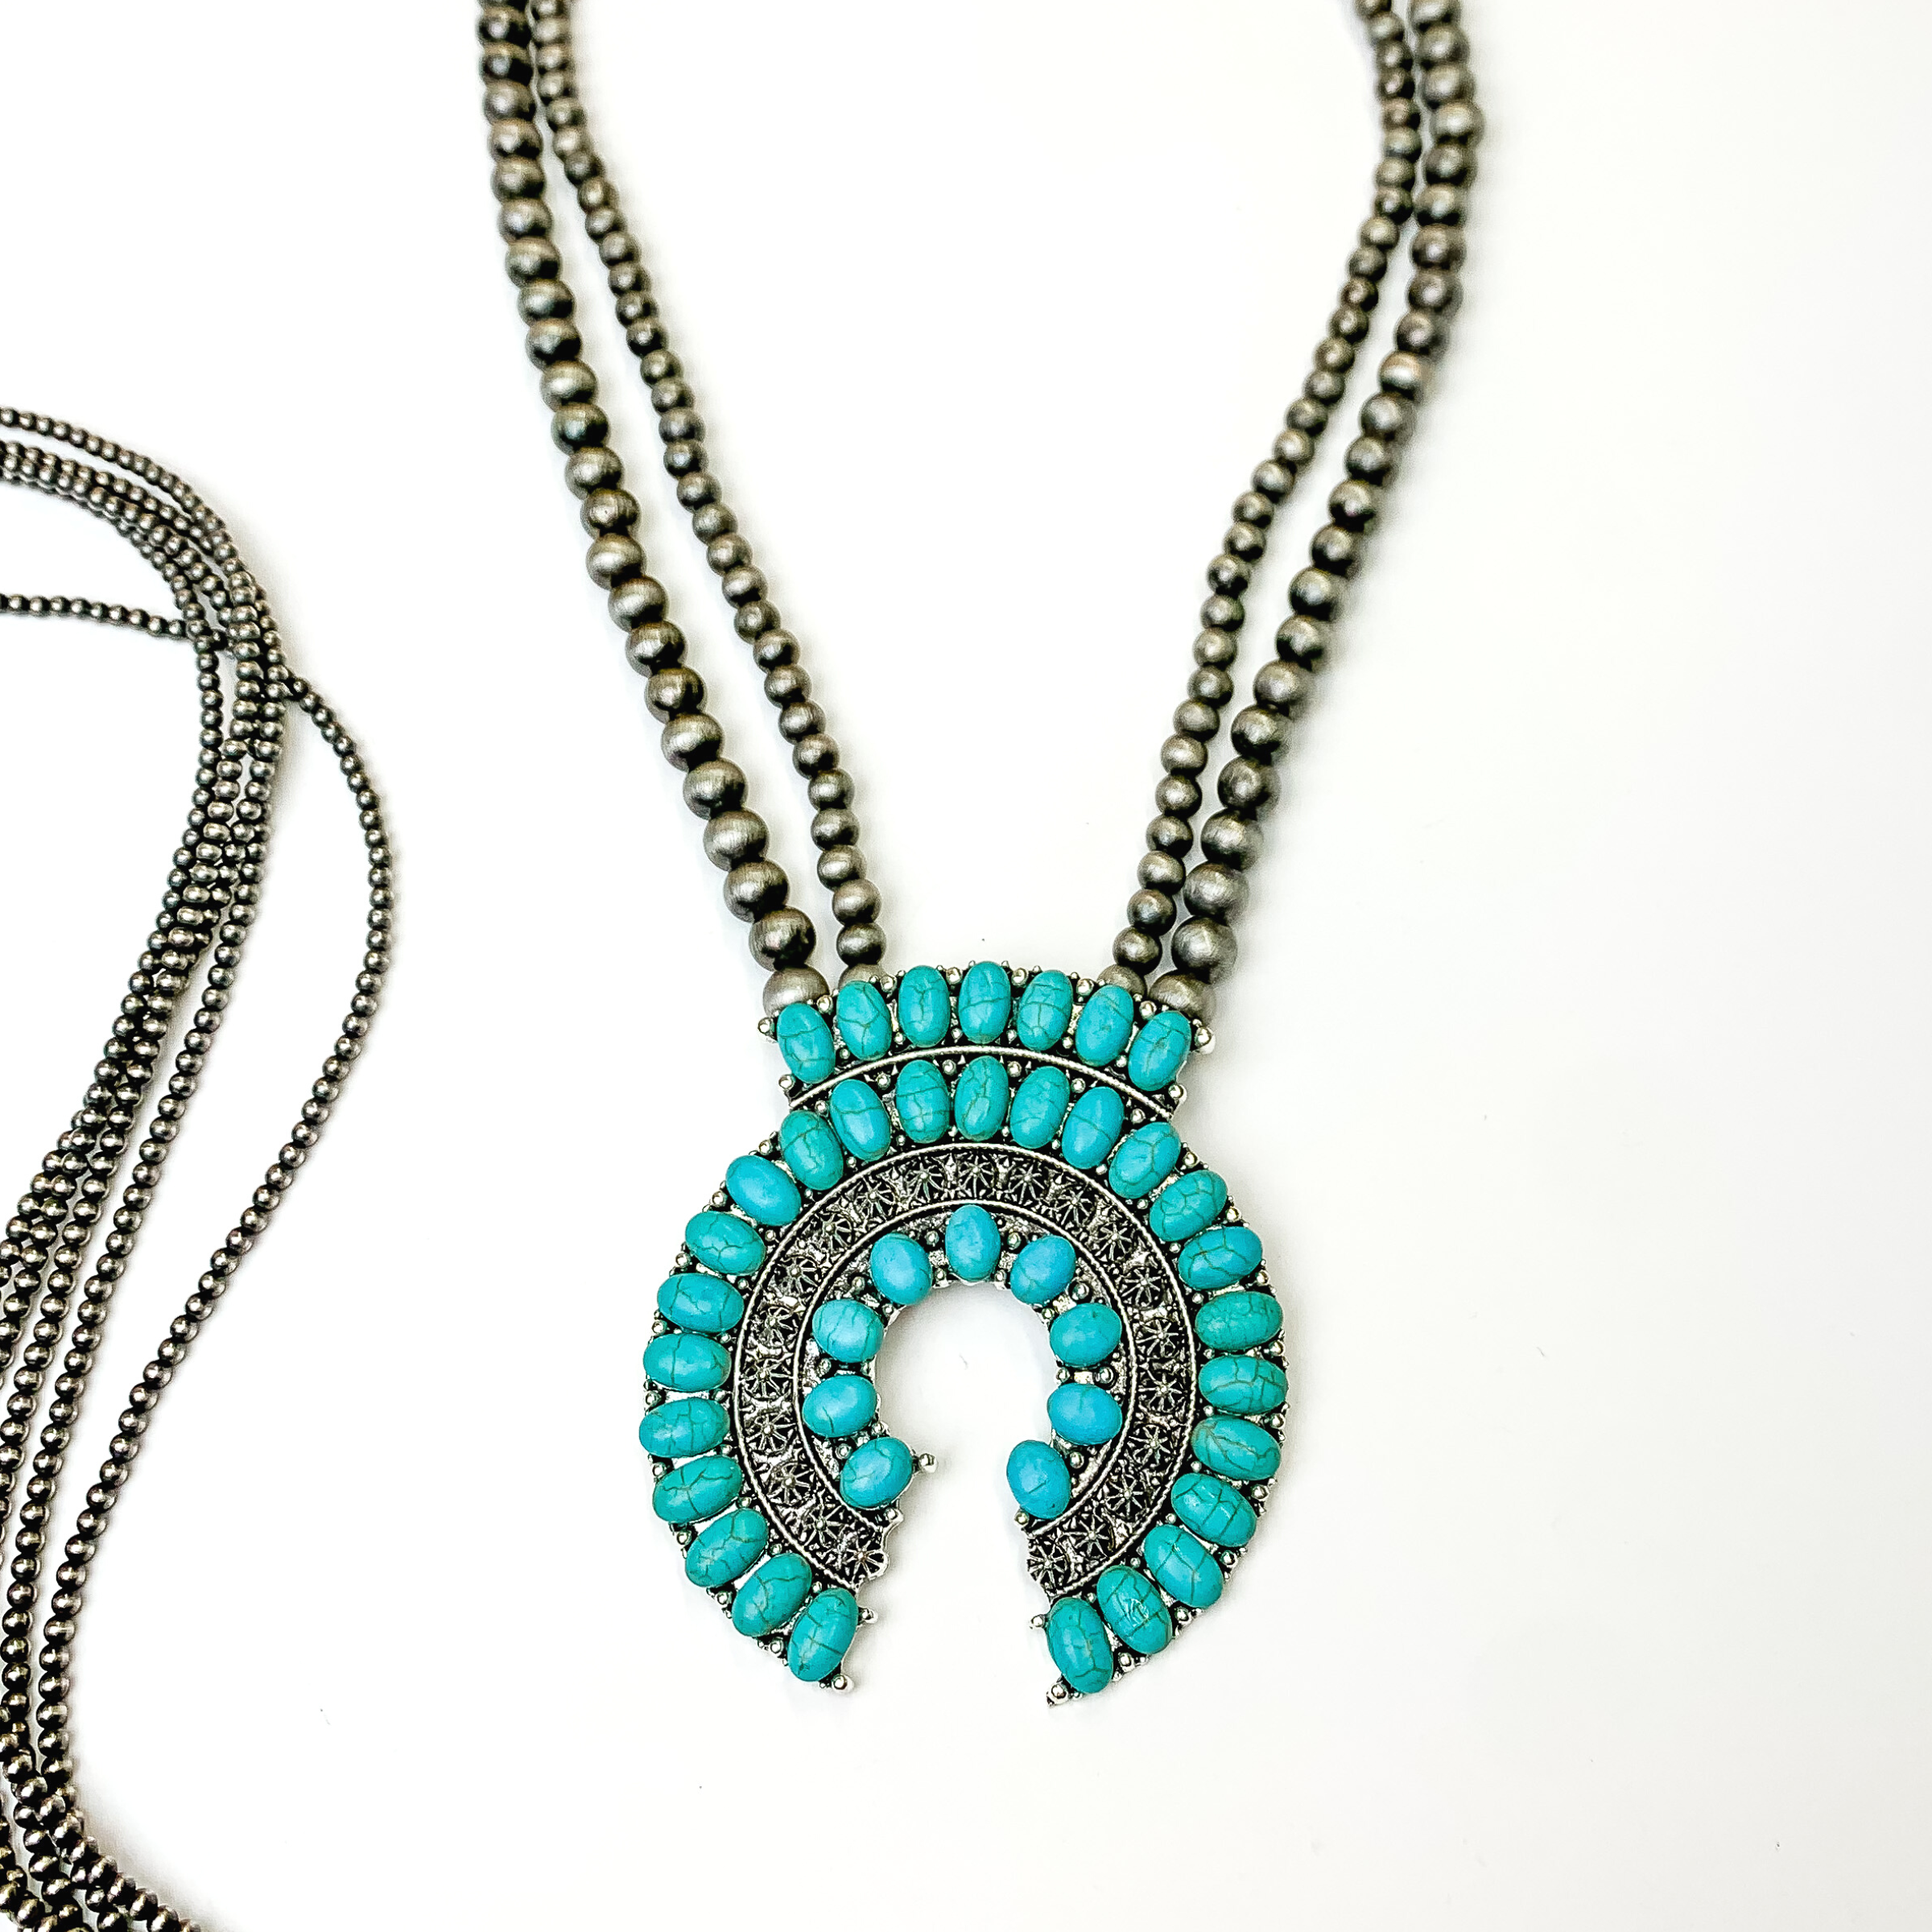 This silver beaded double strand necklace with silver naja pendant and turquoise stones covering it. This necklace is pictured on a white background with silver beads on the left side of the picture.   